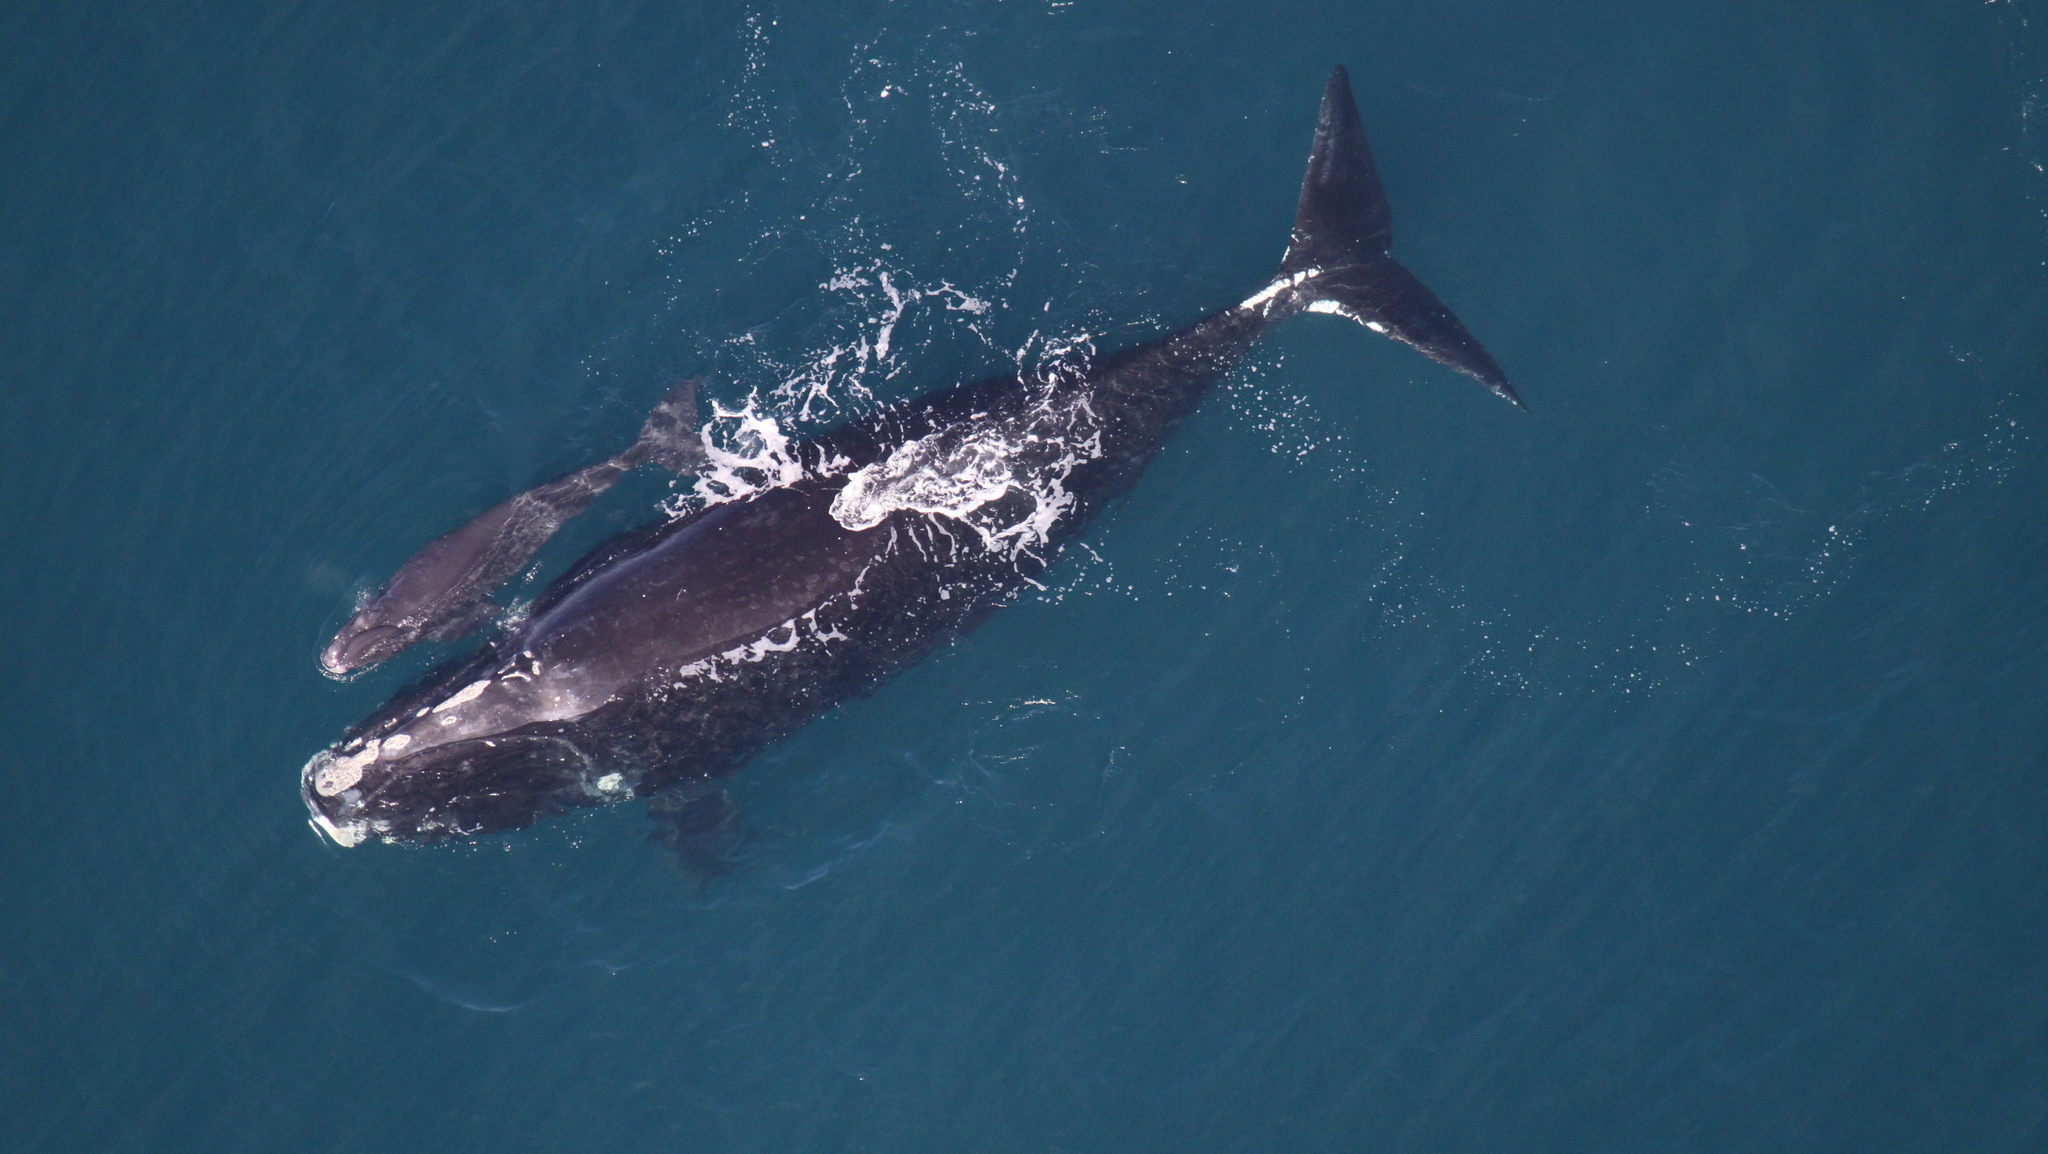 A mother right whale with a calf, around 3 days old, was spotted in December 2013 off the coast of Sapelo Island, Ga. (Photo courtesy Sea to Shore Alliance/NOAA Permit #15488)